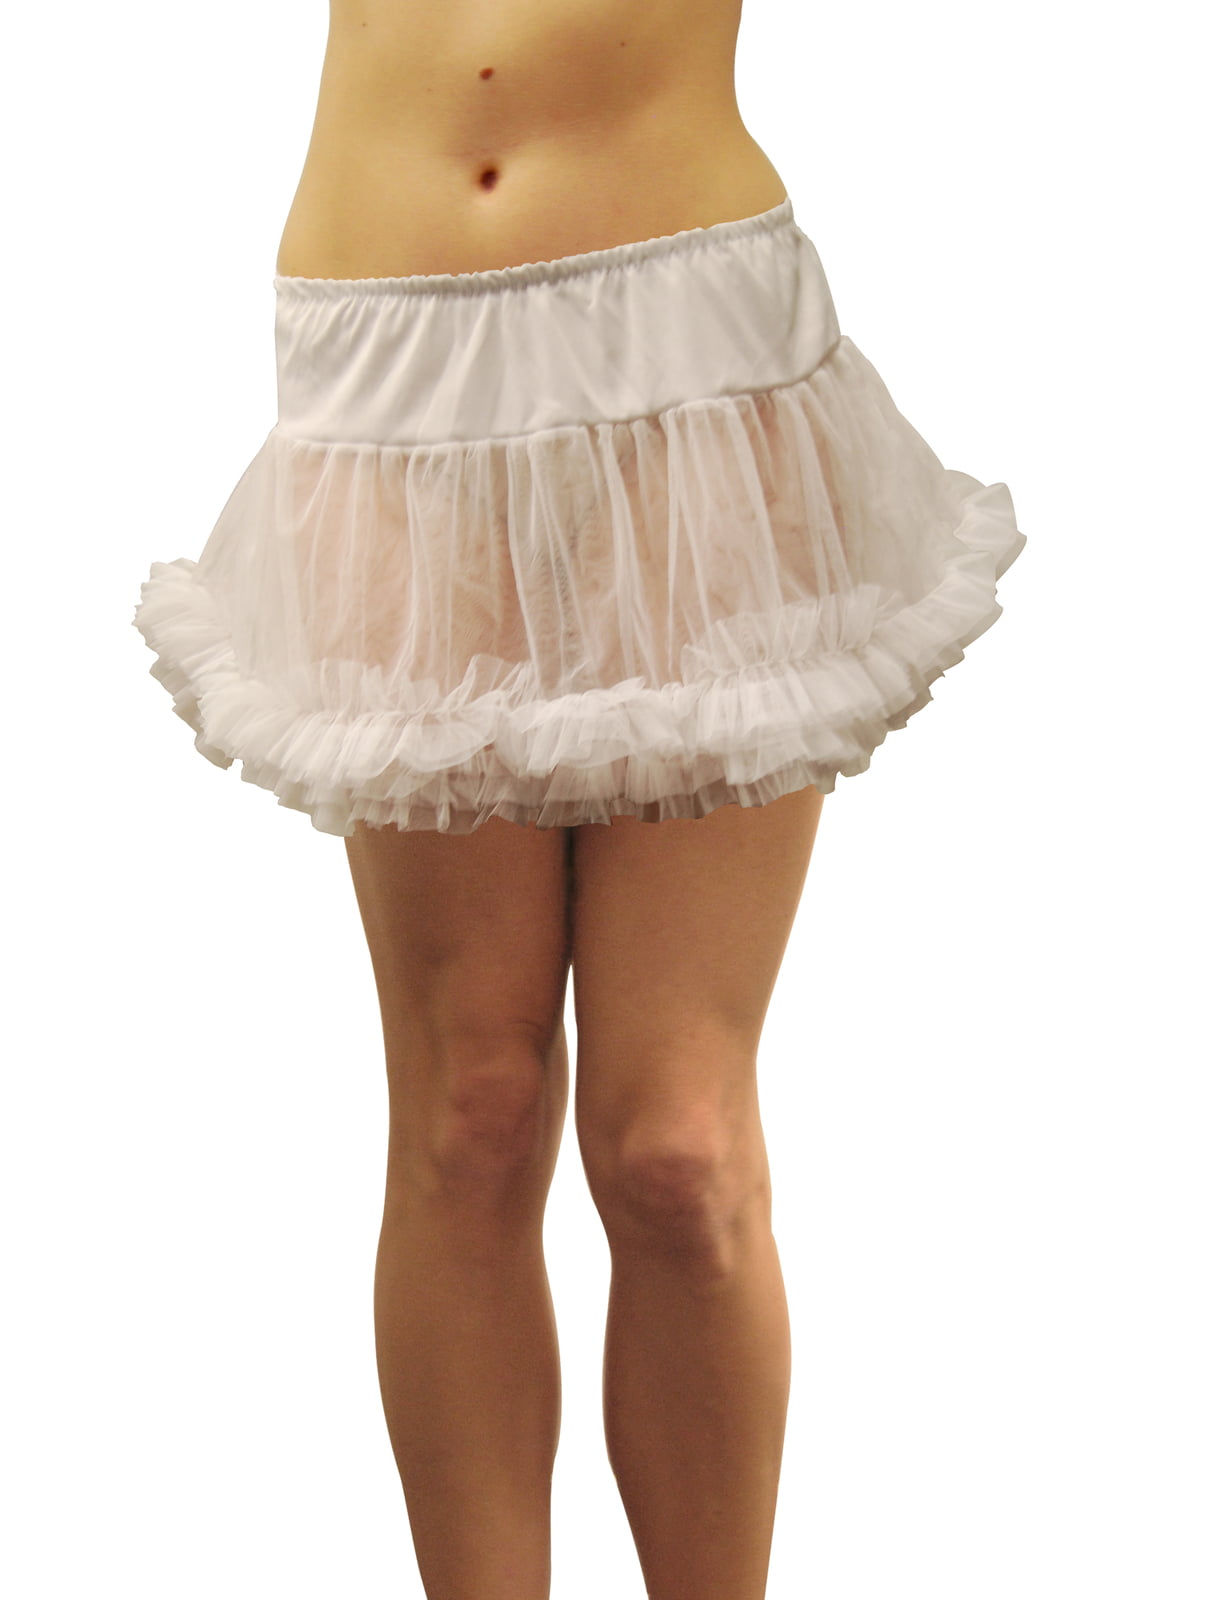 Featured image for “Tulle Petticoat Skirt (White), Adult”